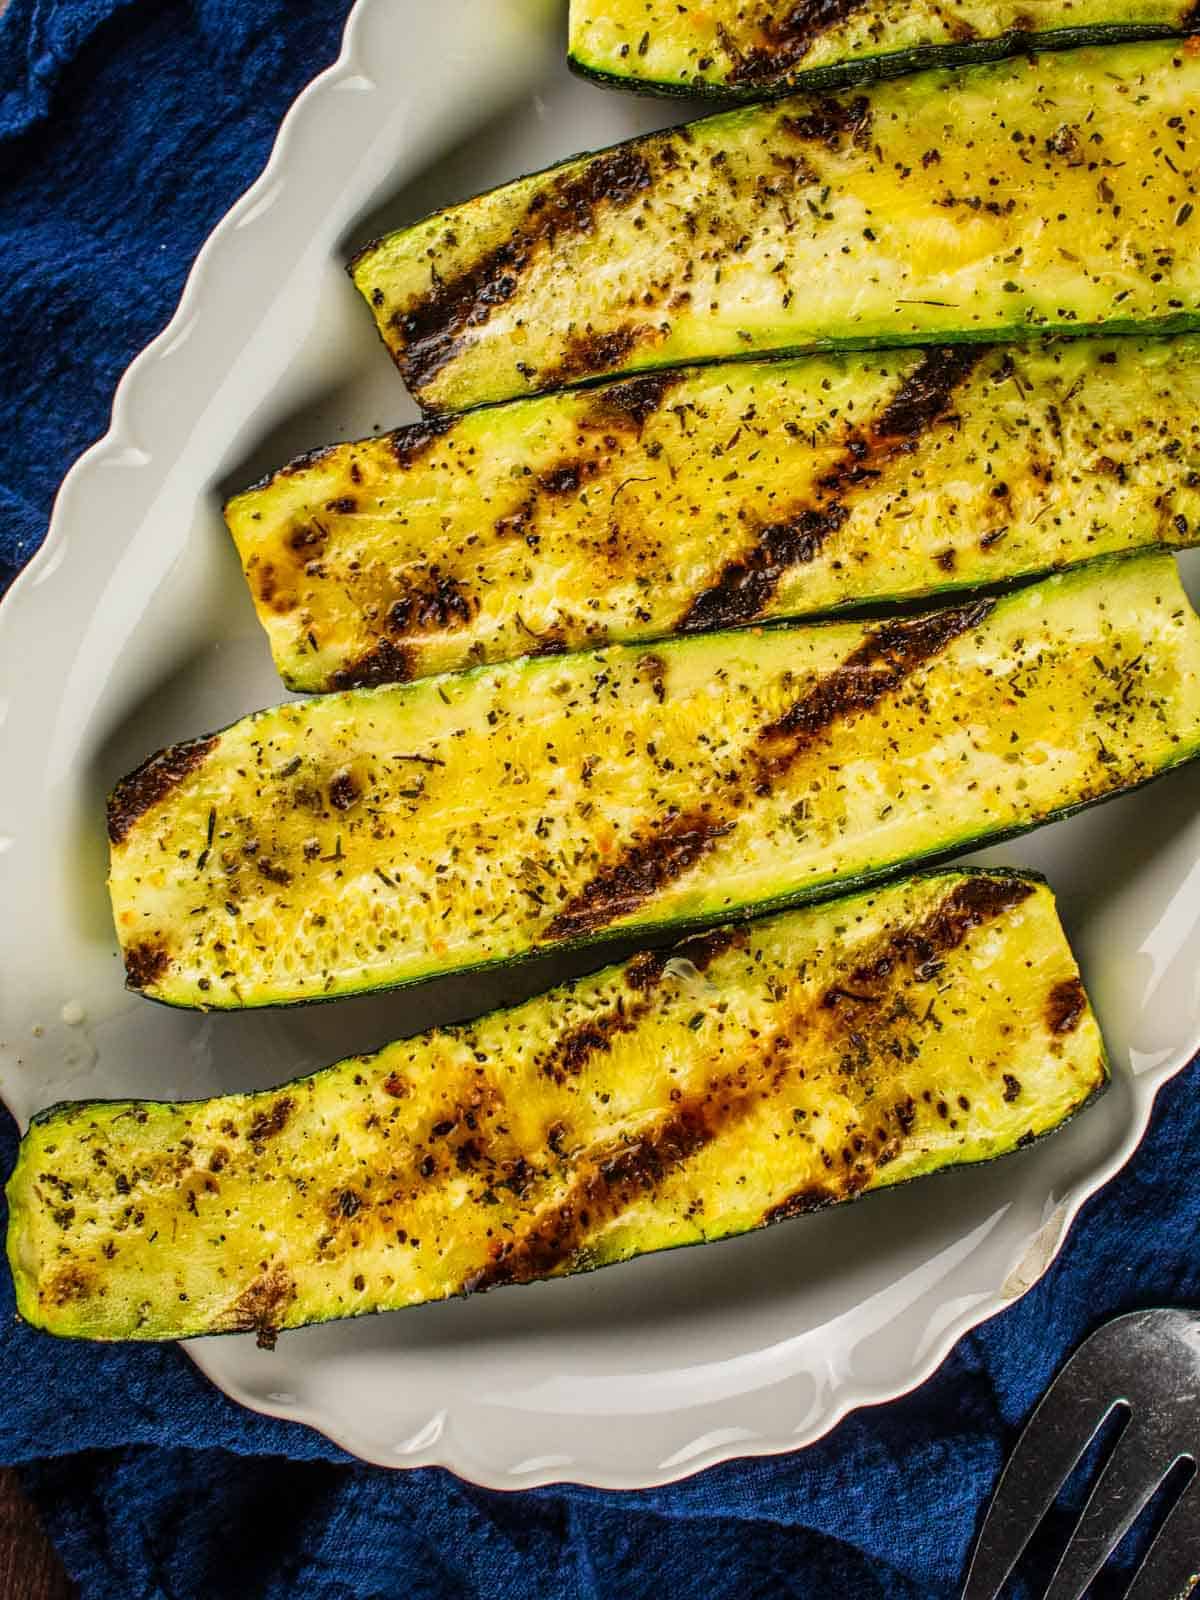 grilled seasoned zucchini halves on a white platter with a blue towel underneath it